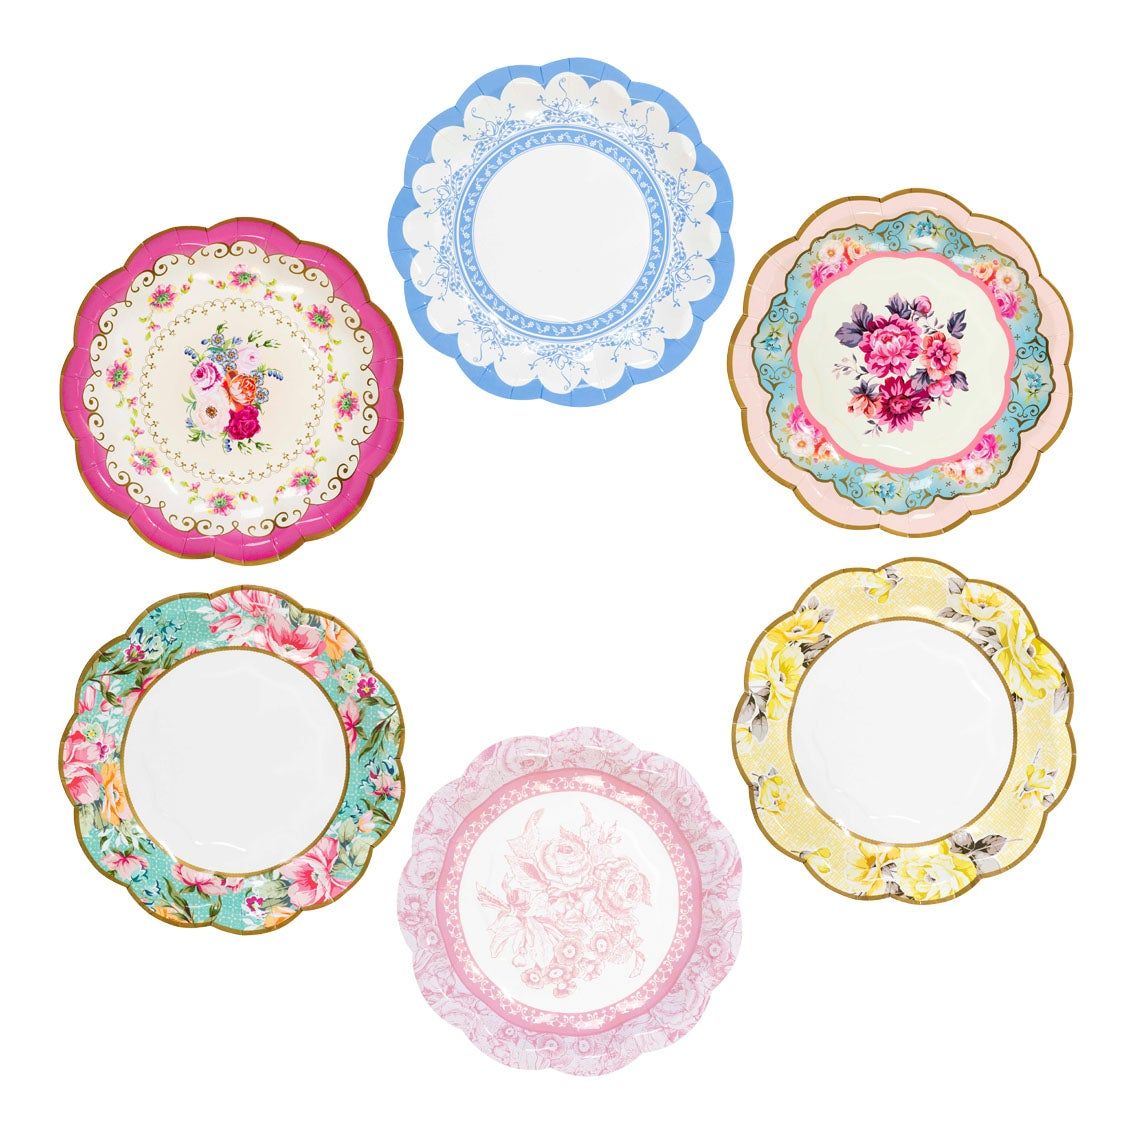 Talking Tables Truly Scrumptious Vintage Paper Plates